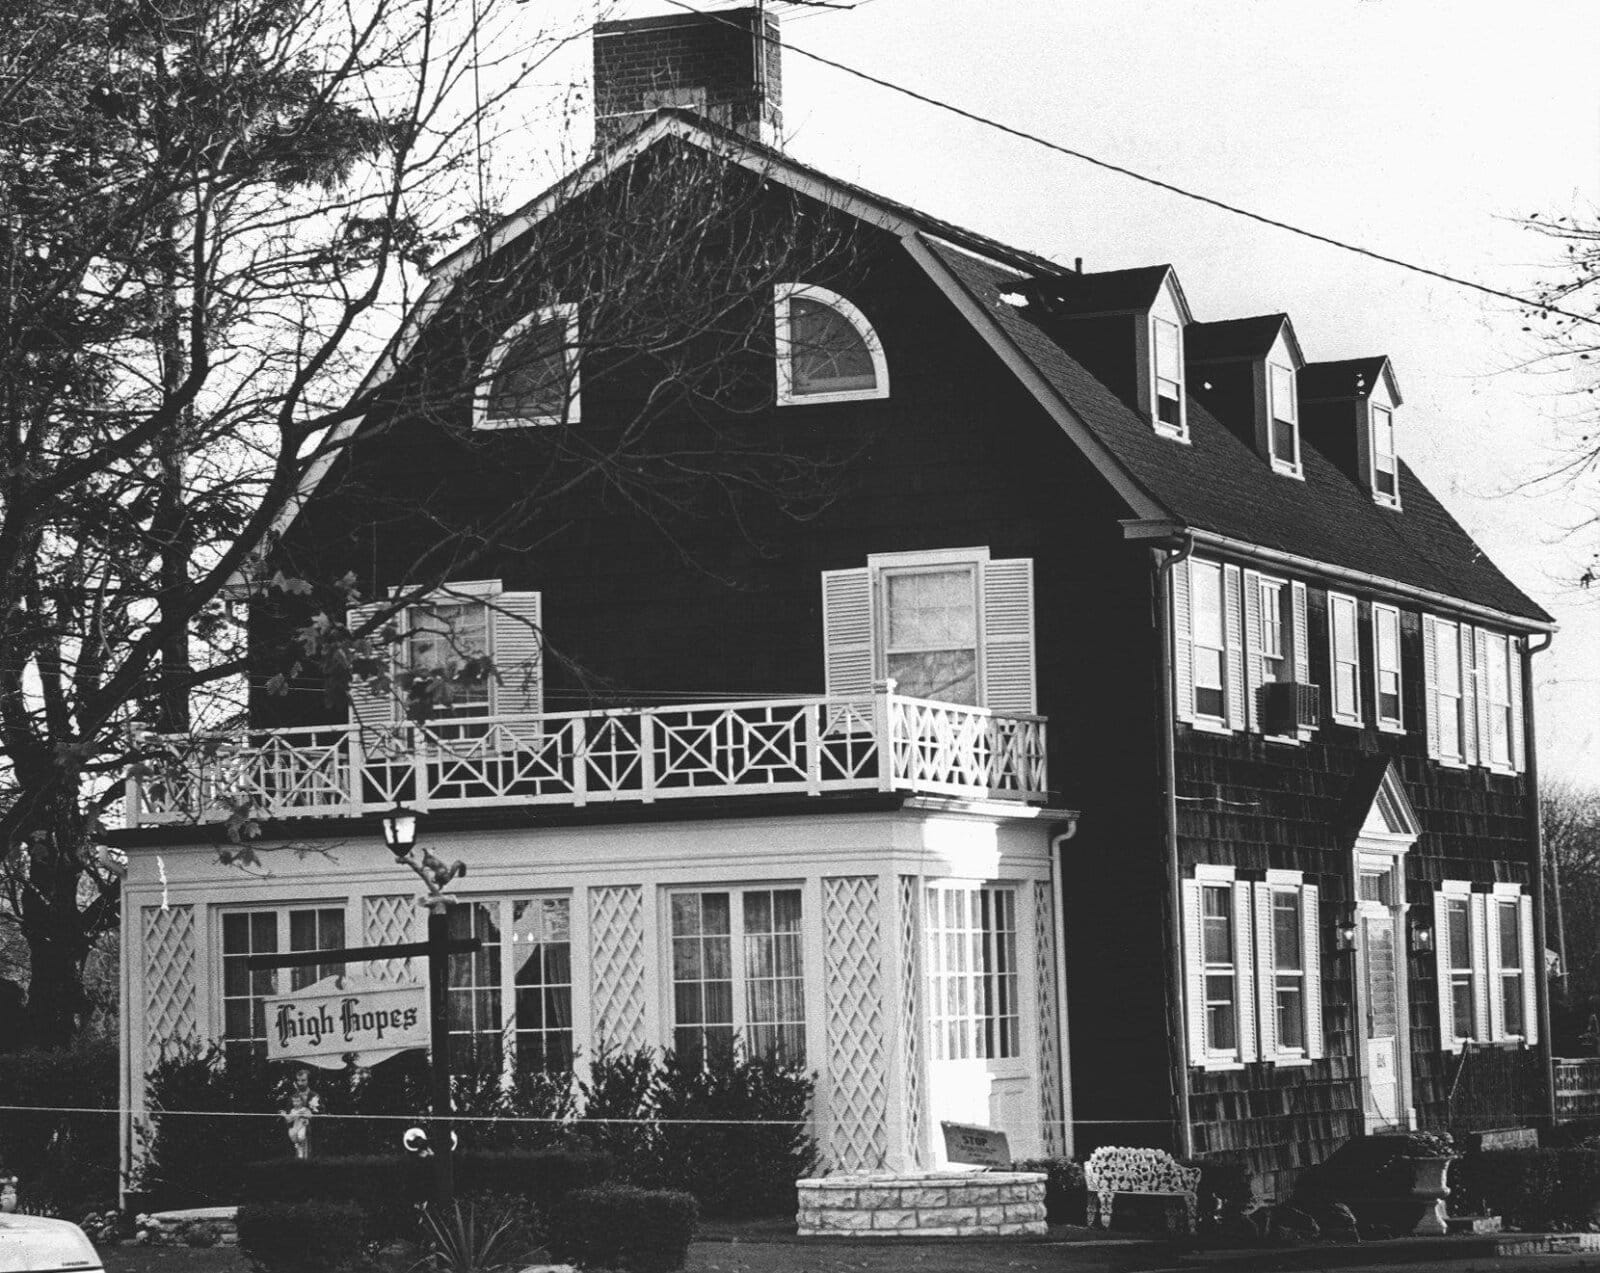 Amityville An Origin Story review